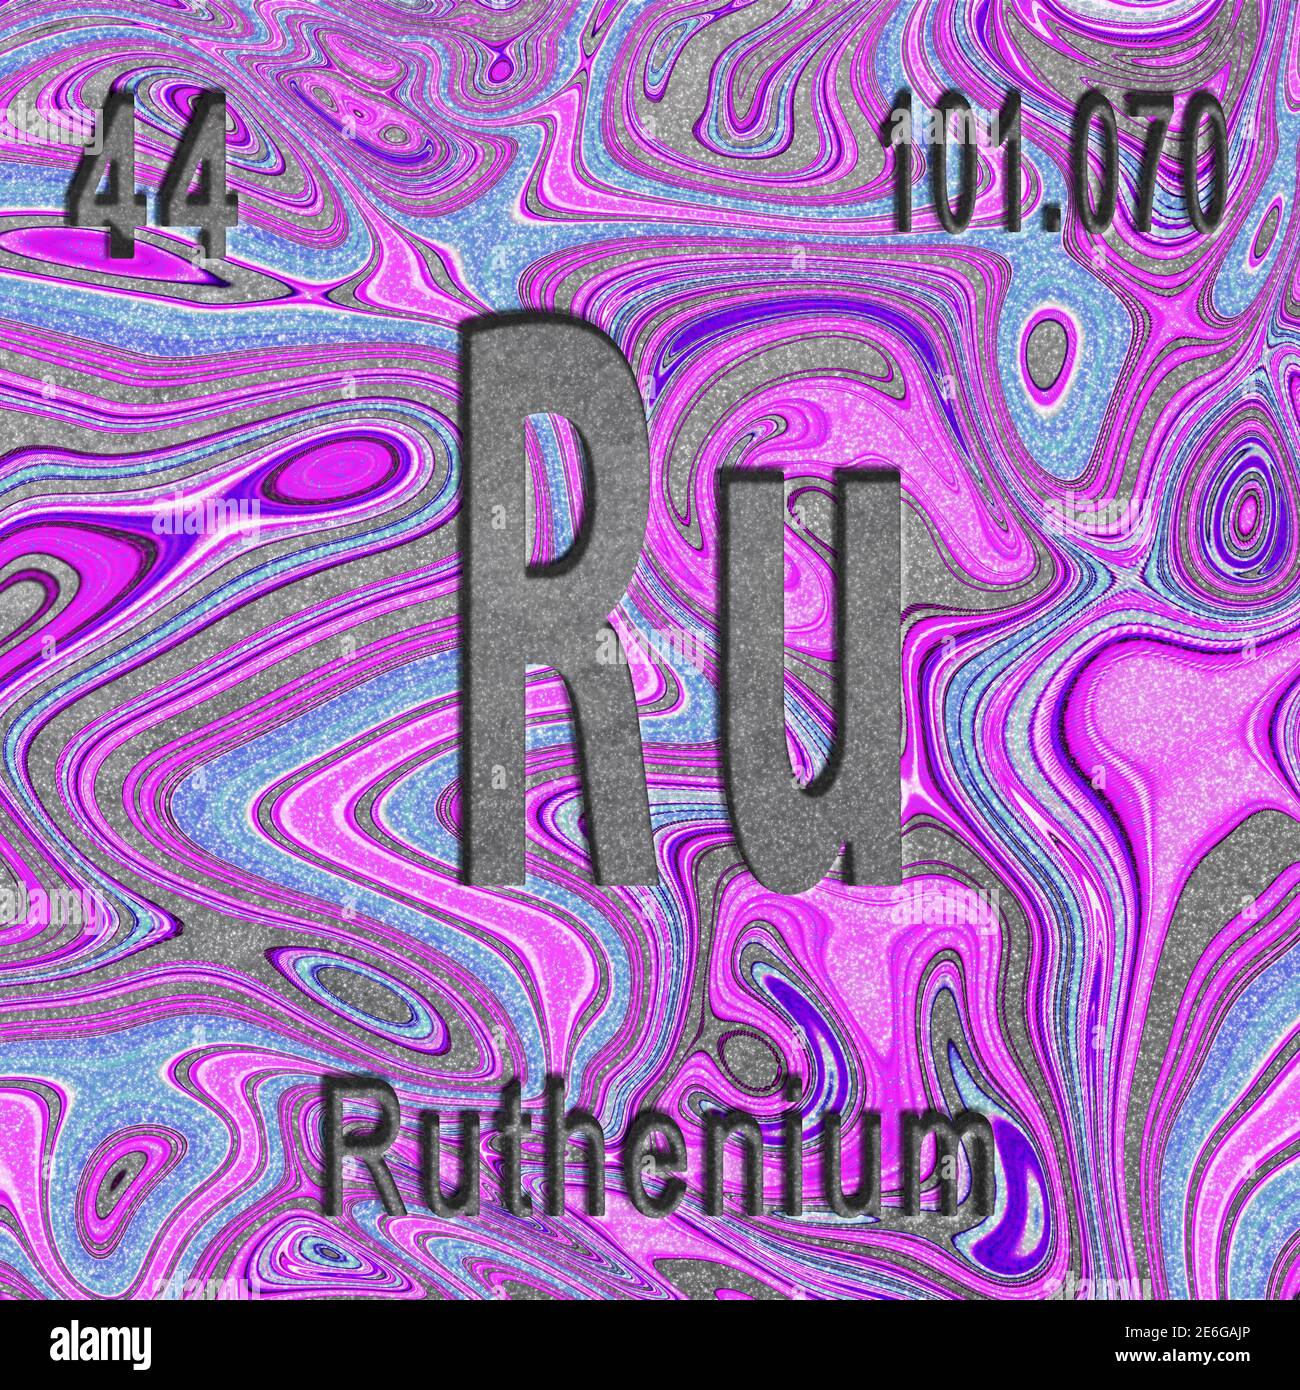 Ruthenium chemical element, Sign with atomic number and atomic weight, purple background, Periodic Table Element Stock Photo